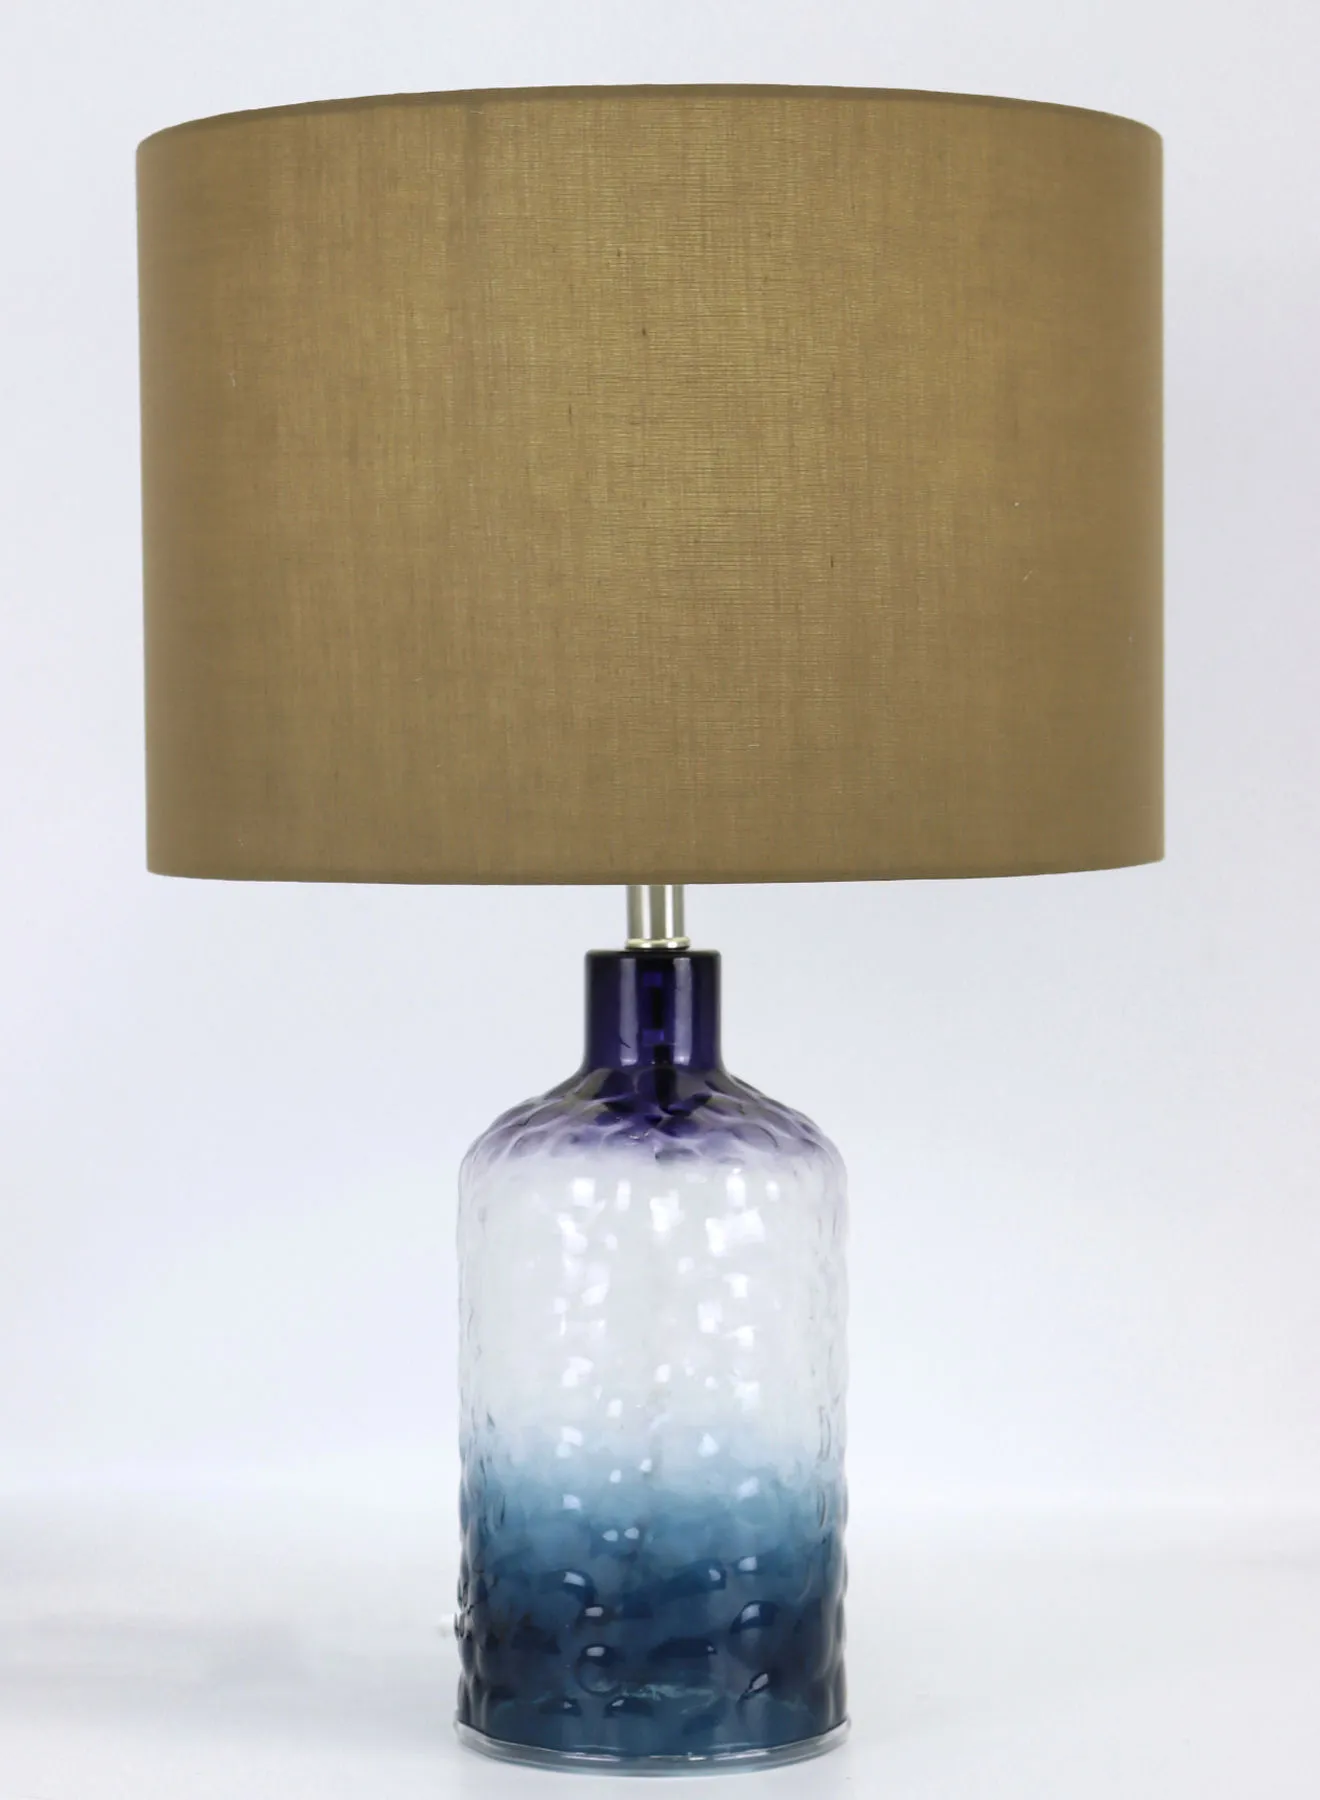 ebb & flow Modern Design Glass Table Lamp Unique Luxury Quality Material for the Perfect Stylish Home RSN71029 Blue 13 x 20.2